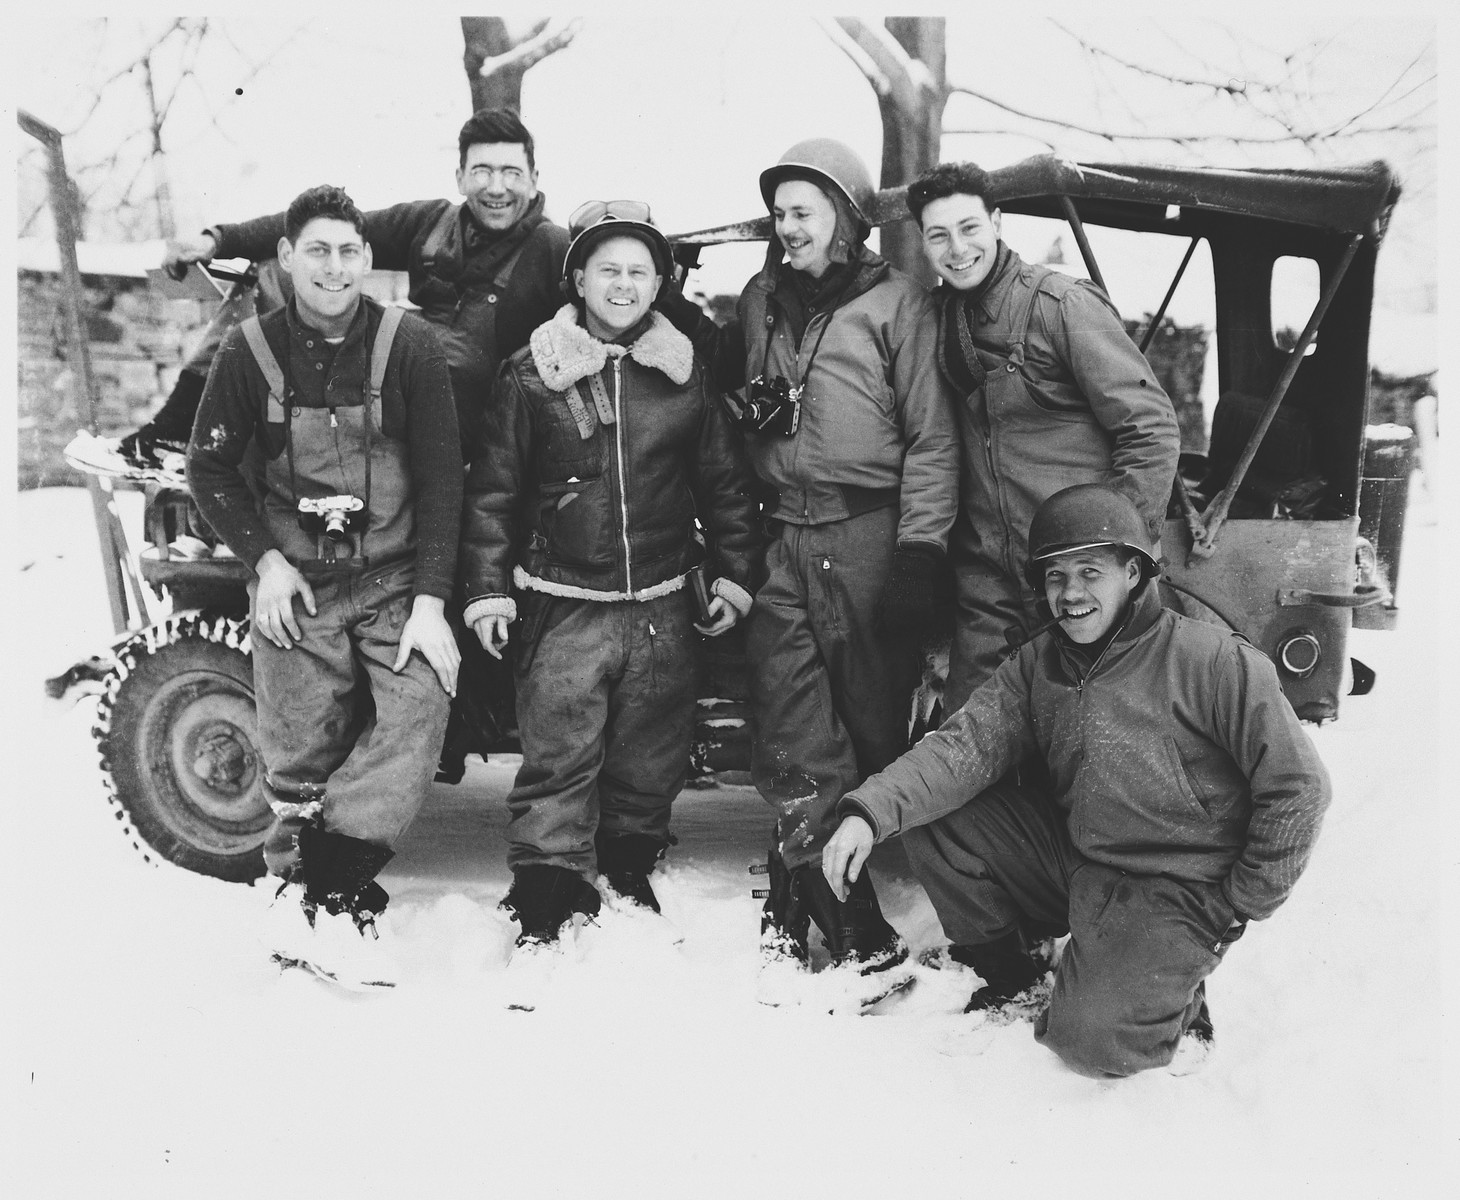 Actor Mickey Rooney poses with the U.S. combat photographers from the 167th Signal Photo Company during his visit to the ETO (European Theatre of Operations).

Pictured from left to right are: Charles Tesser, Carmen Currad, Mickey Rooney, Arnold Samuelson, Eliot Finkels and John C. Perry (kneeling).